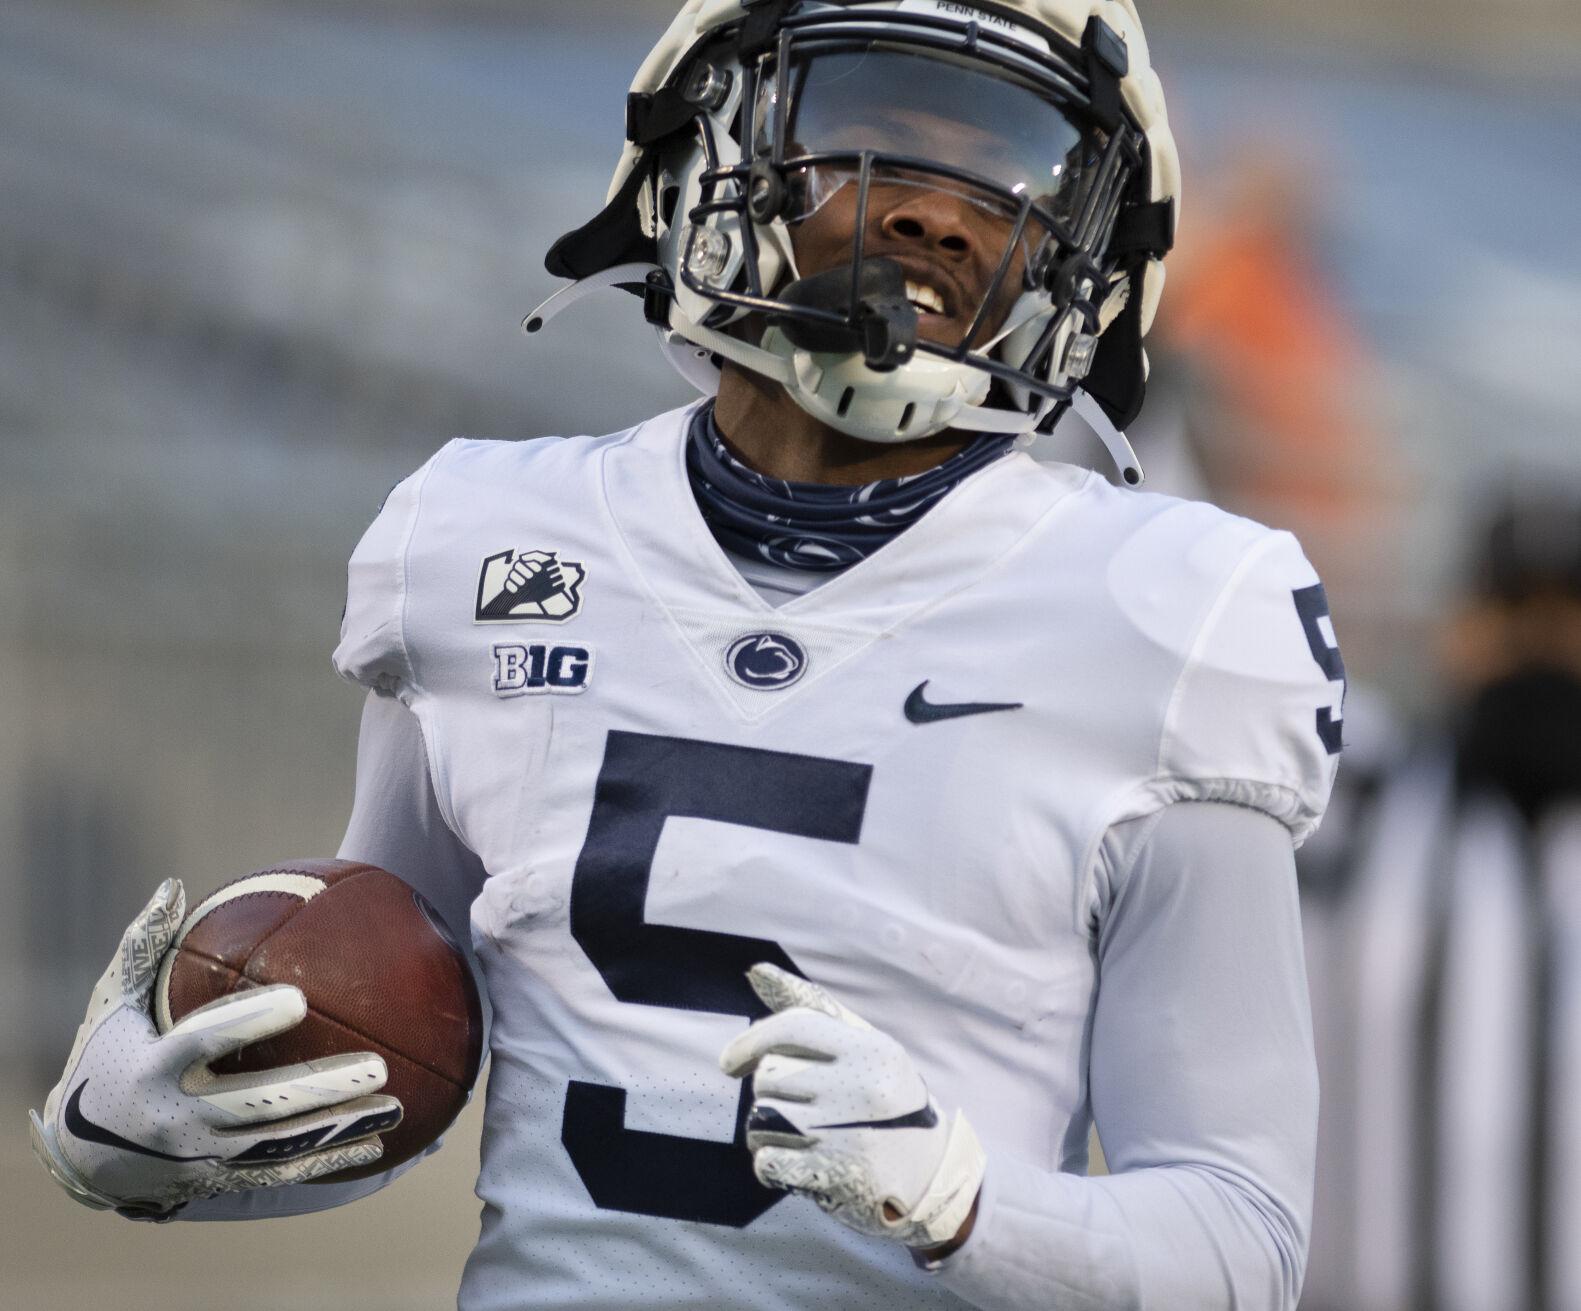 Penn State football wide receiver Jahan Dotson named to Big Ten